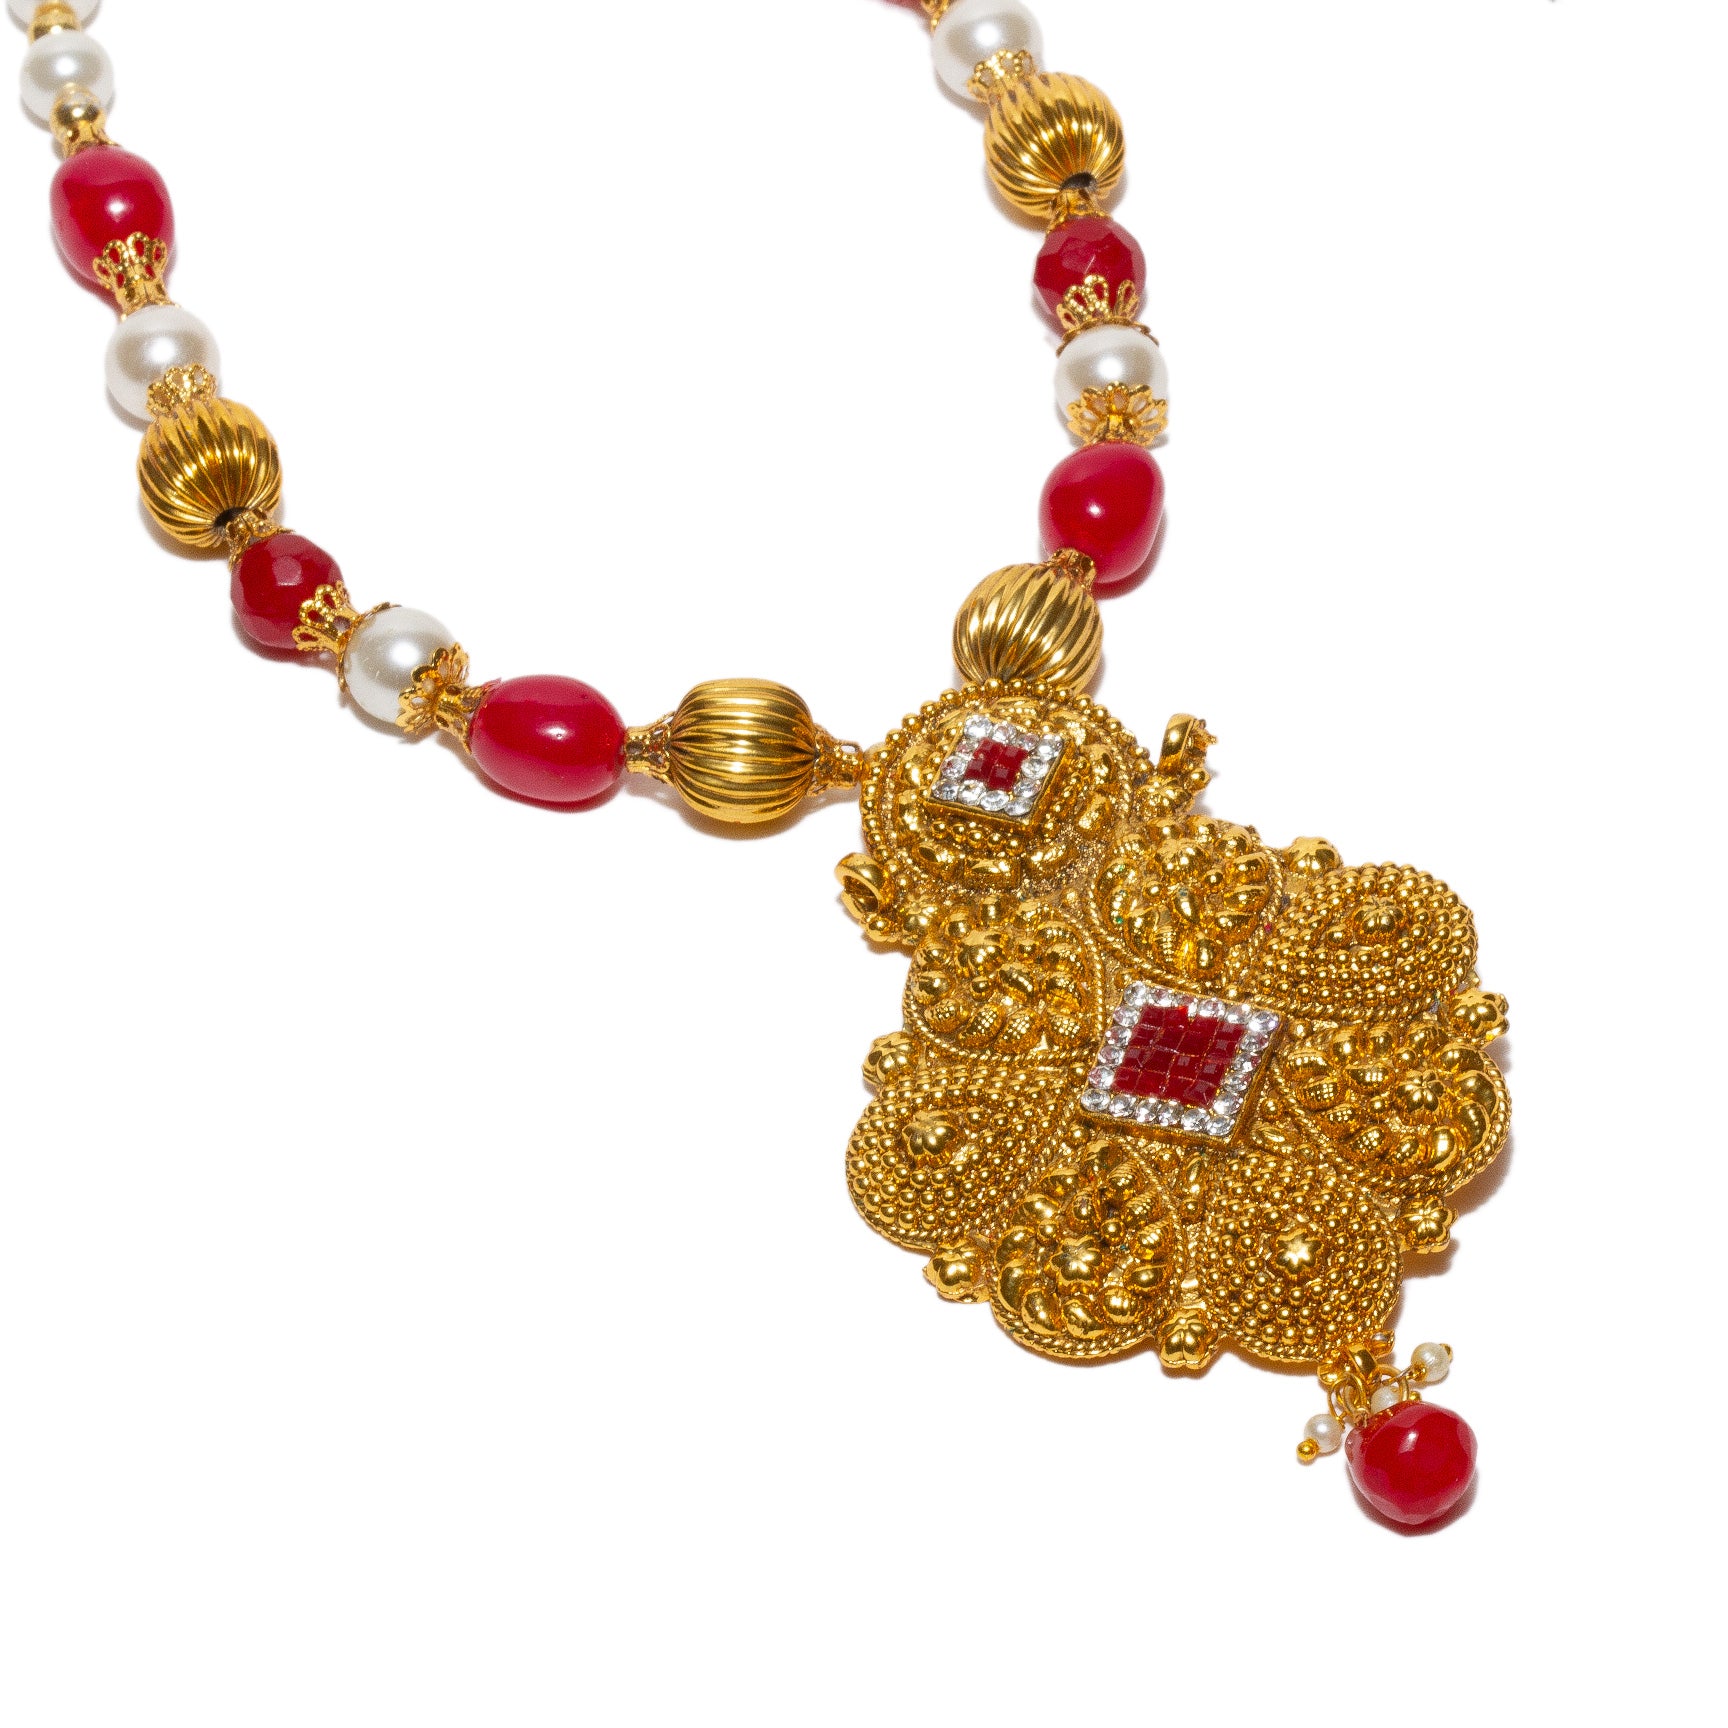 bindhani-gold-plated-white-ruby-pink-golden-color-pearl-mala-flower-necklace-earring-for-women